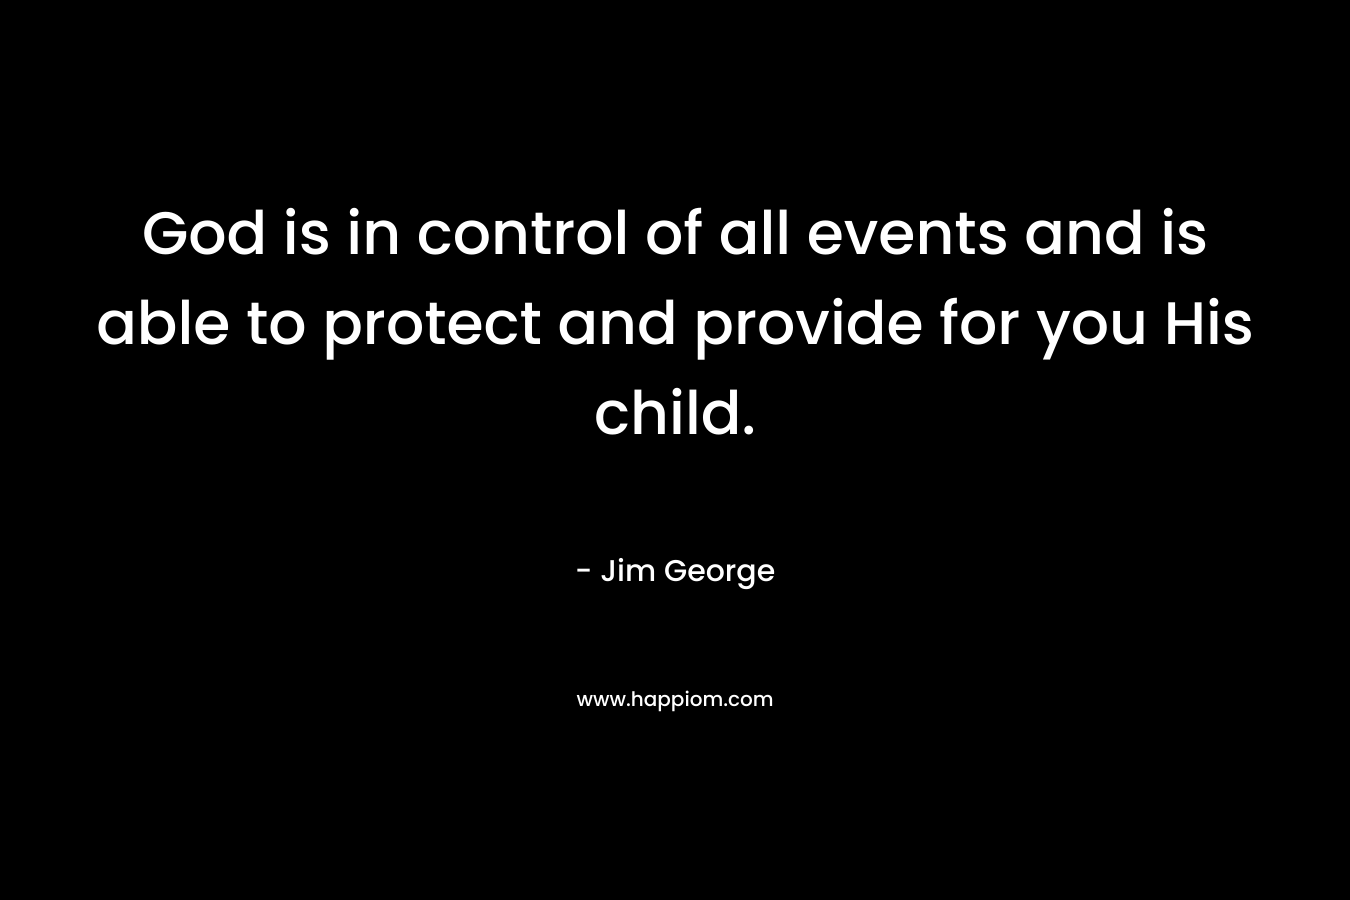 God is in control of all events and is able to protect and provide for you His child.